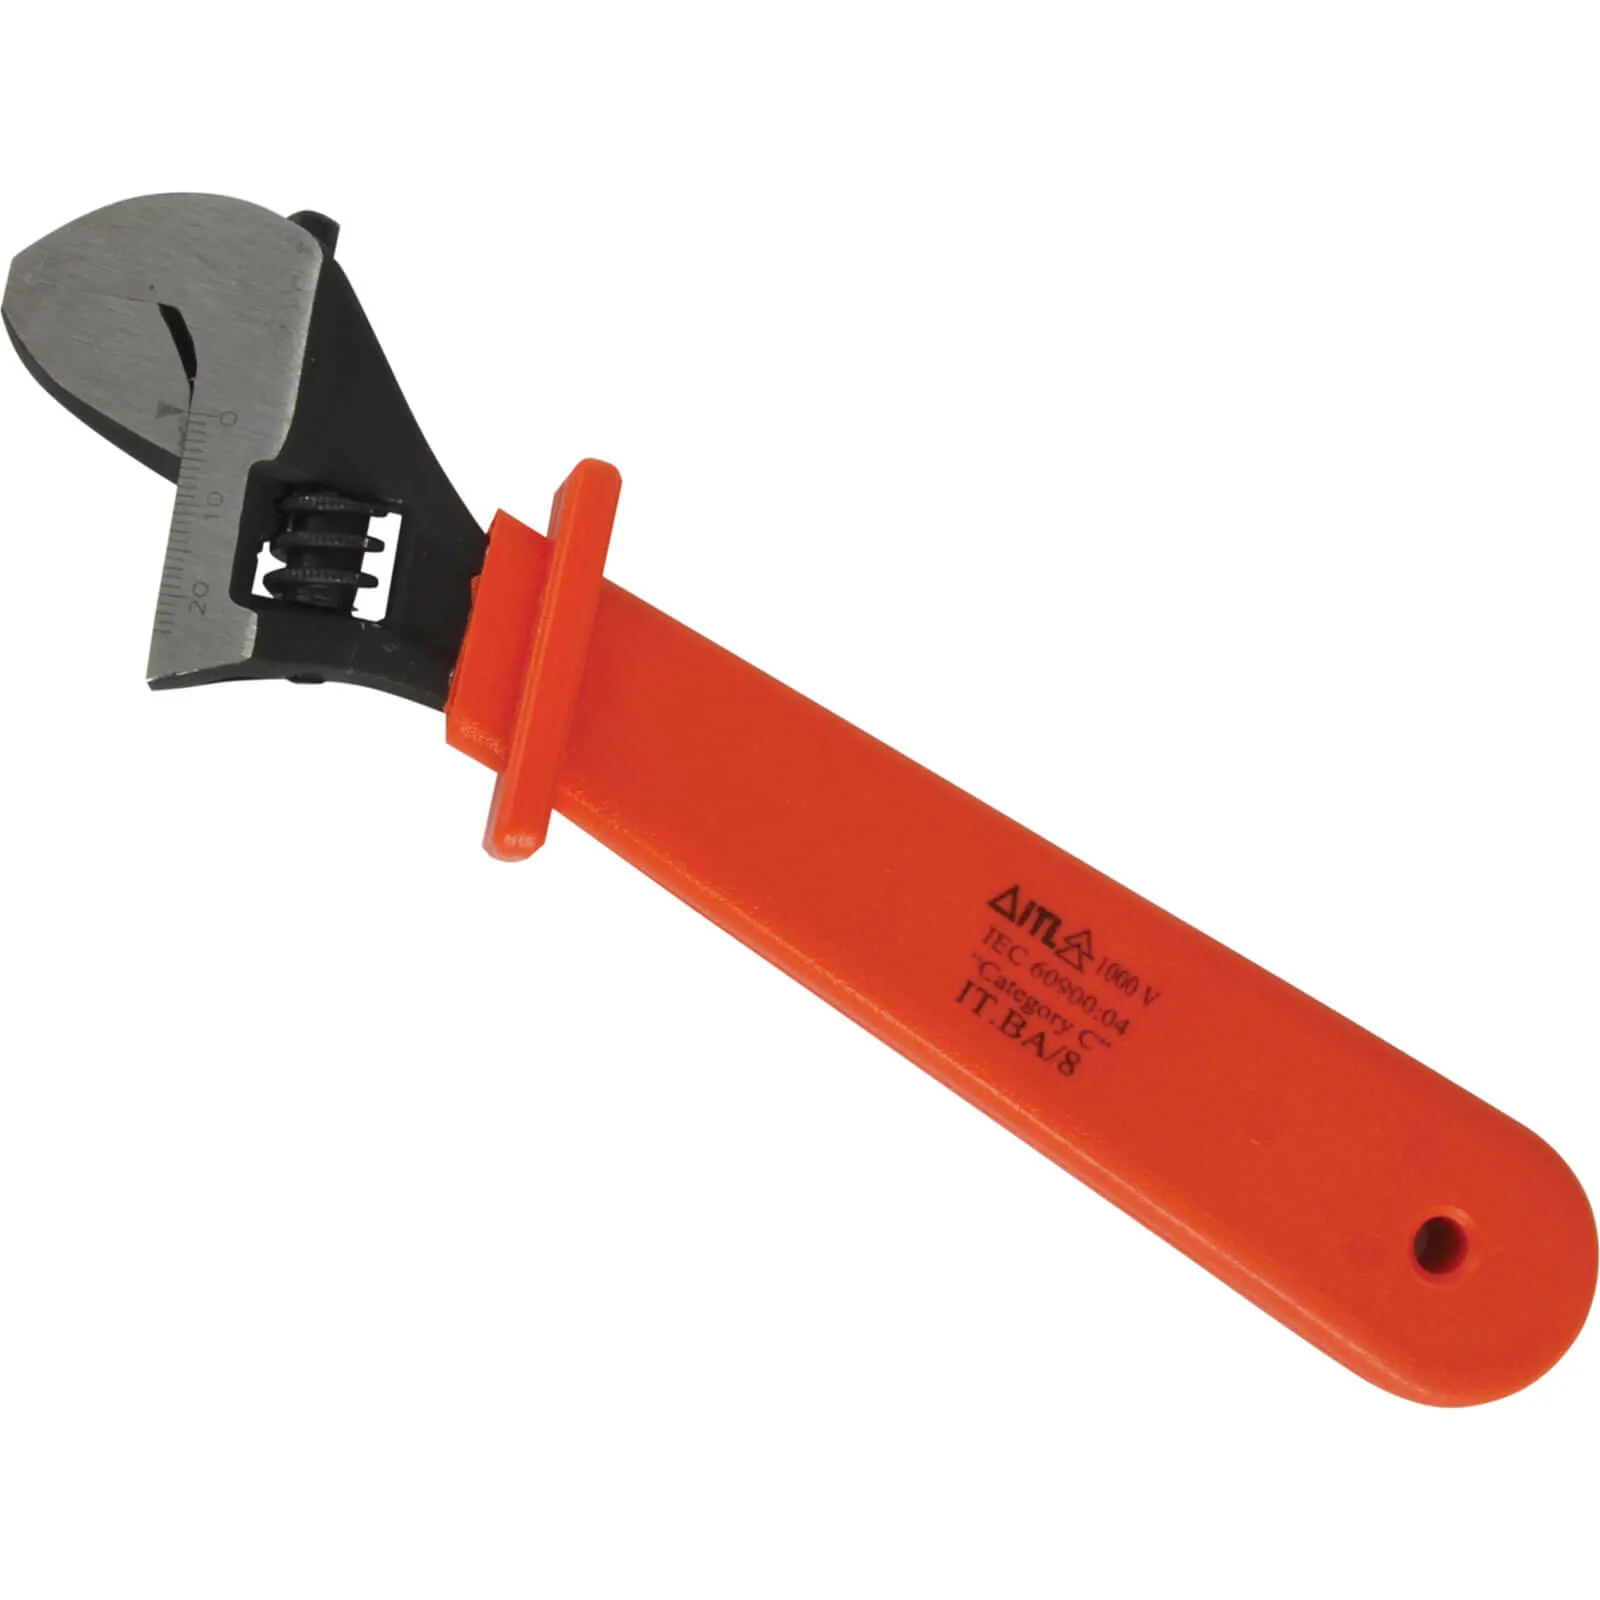 ITL Insulated Adjustable Spanner - 200mm